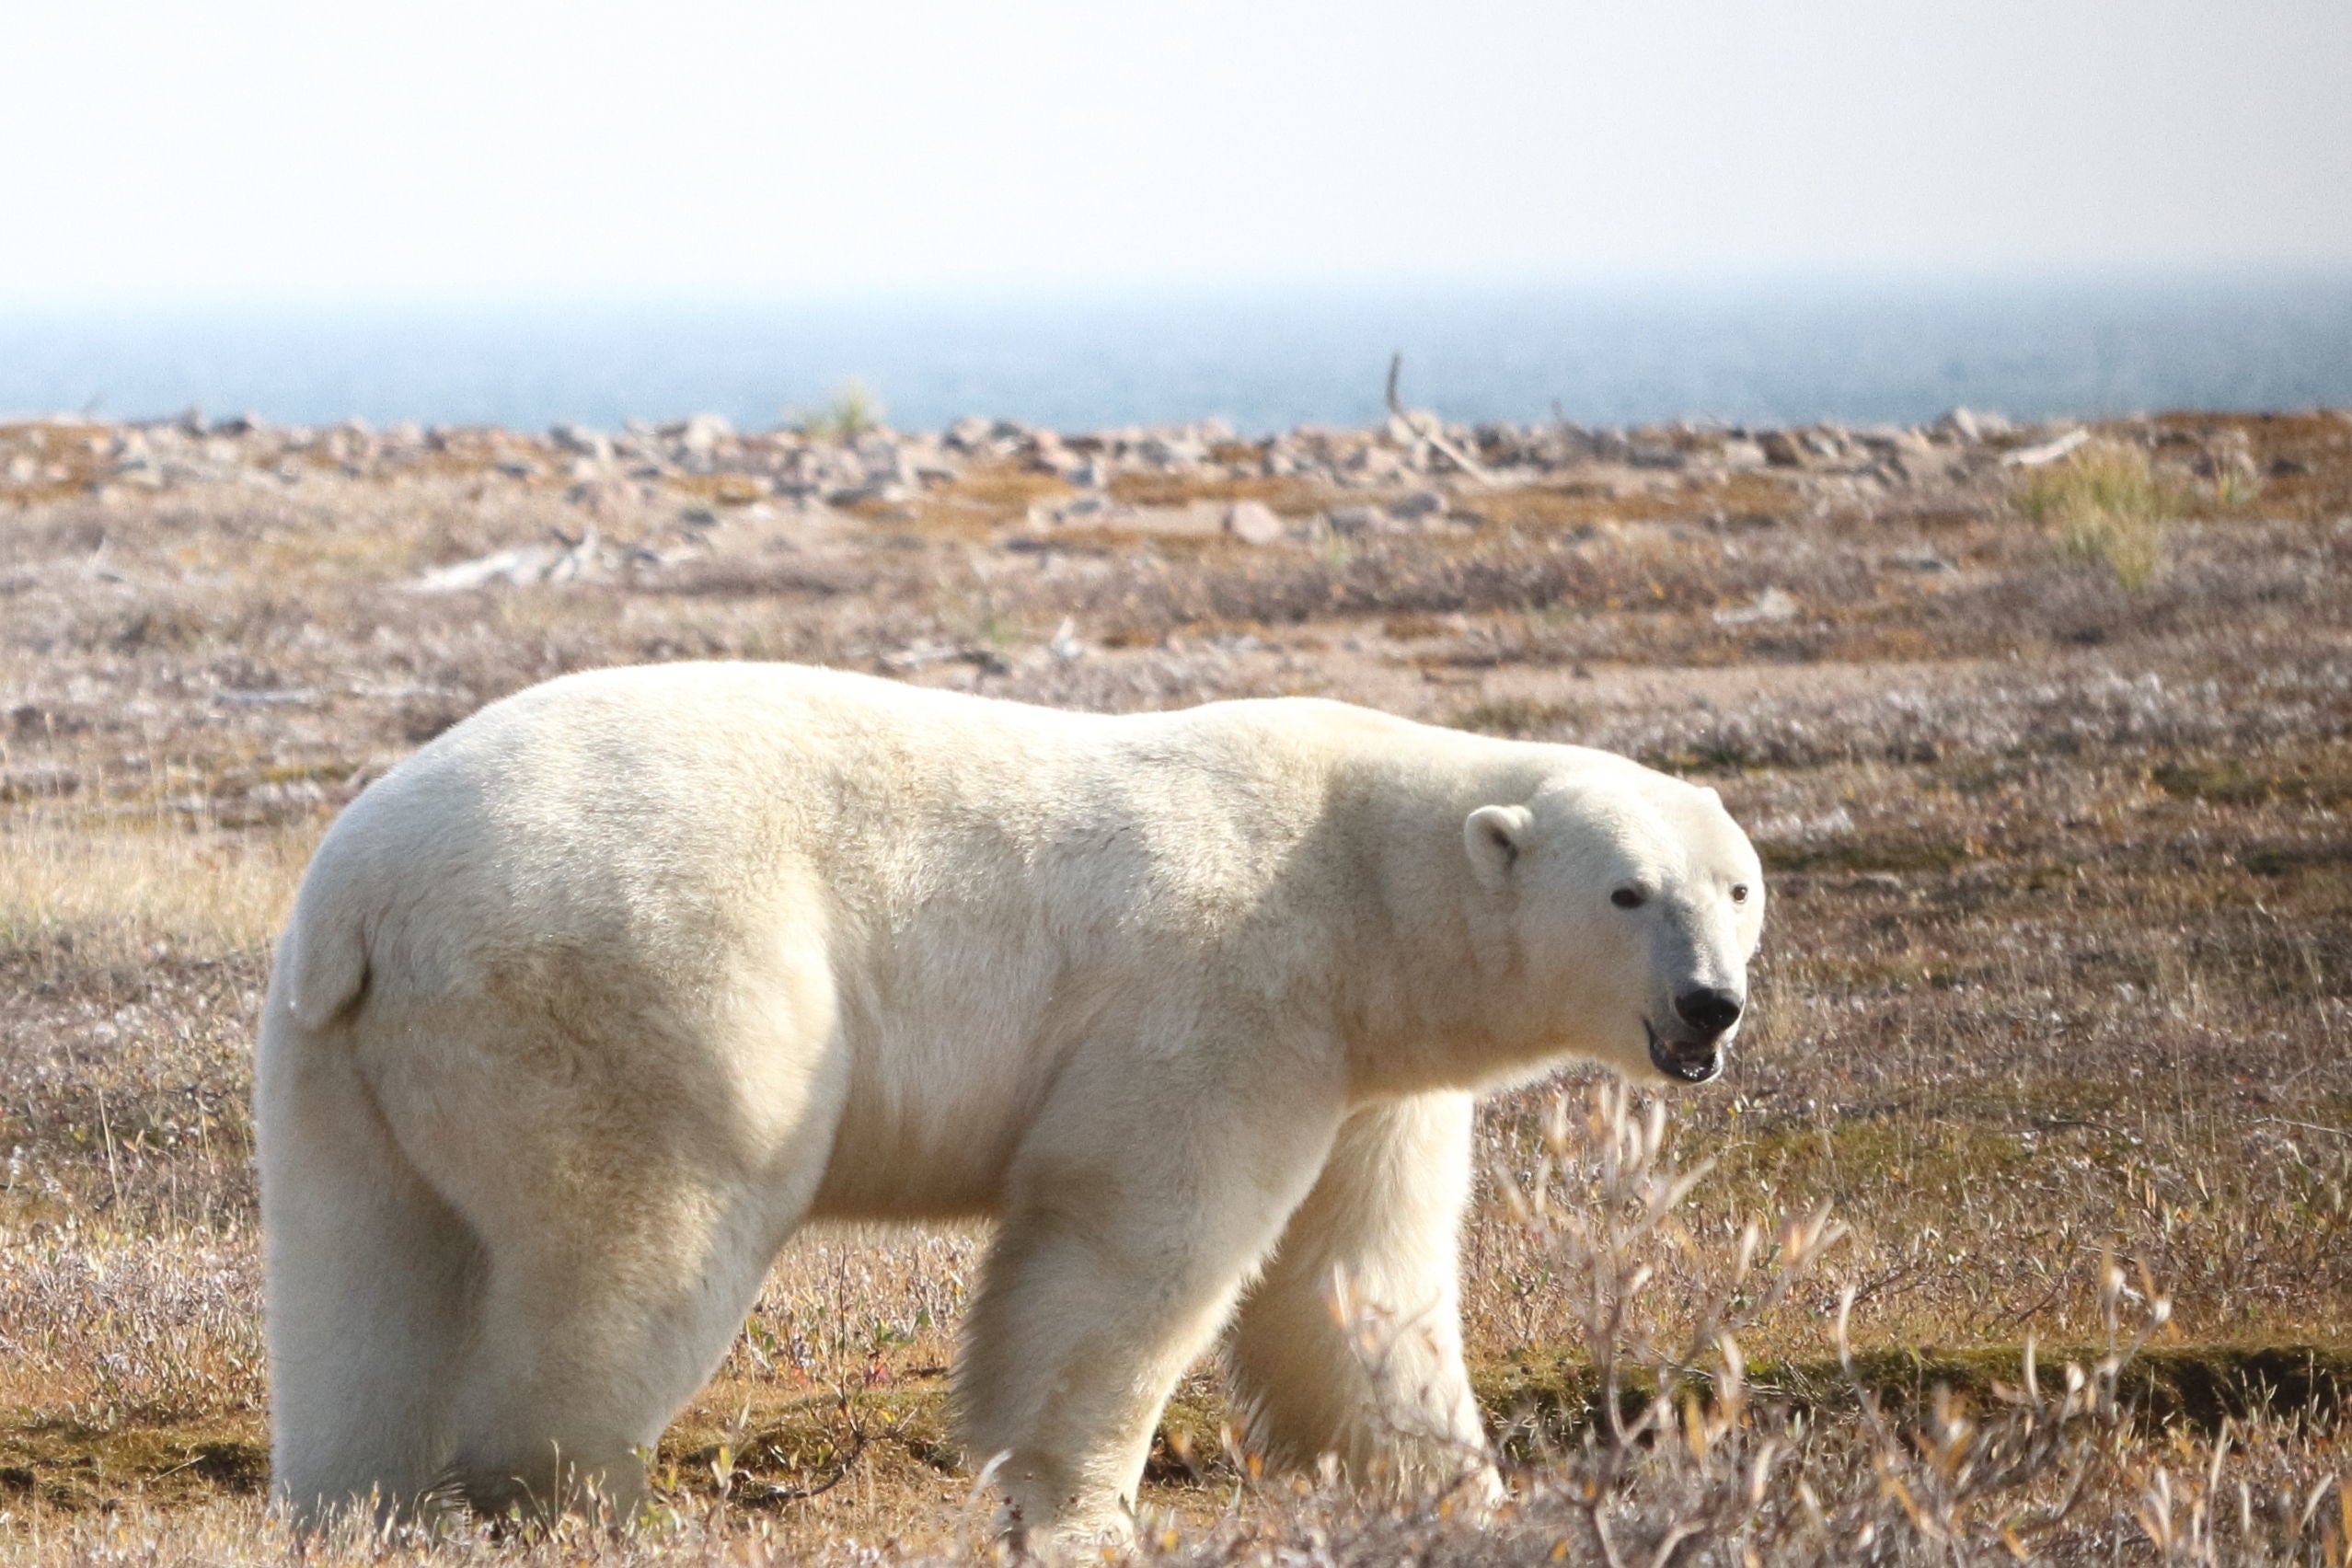 Polar bears would be at risk of starvation